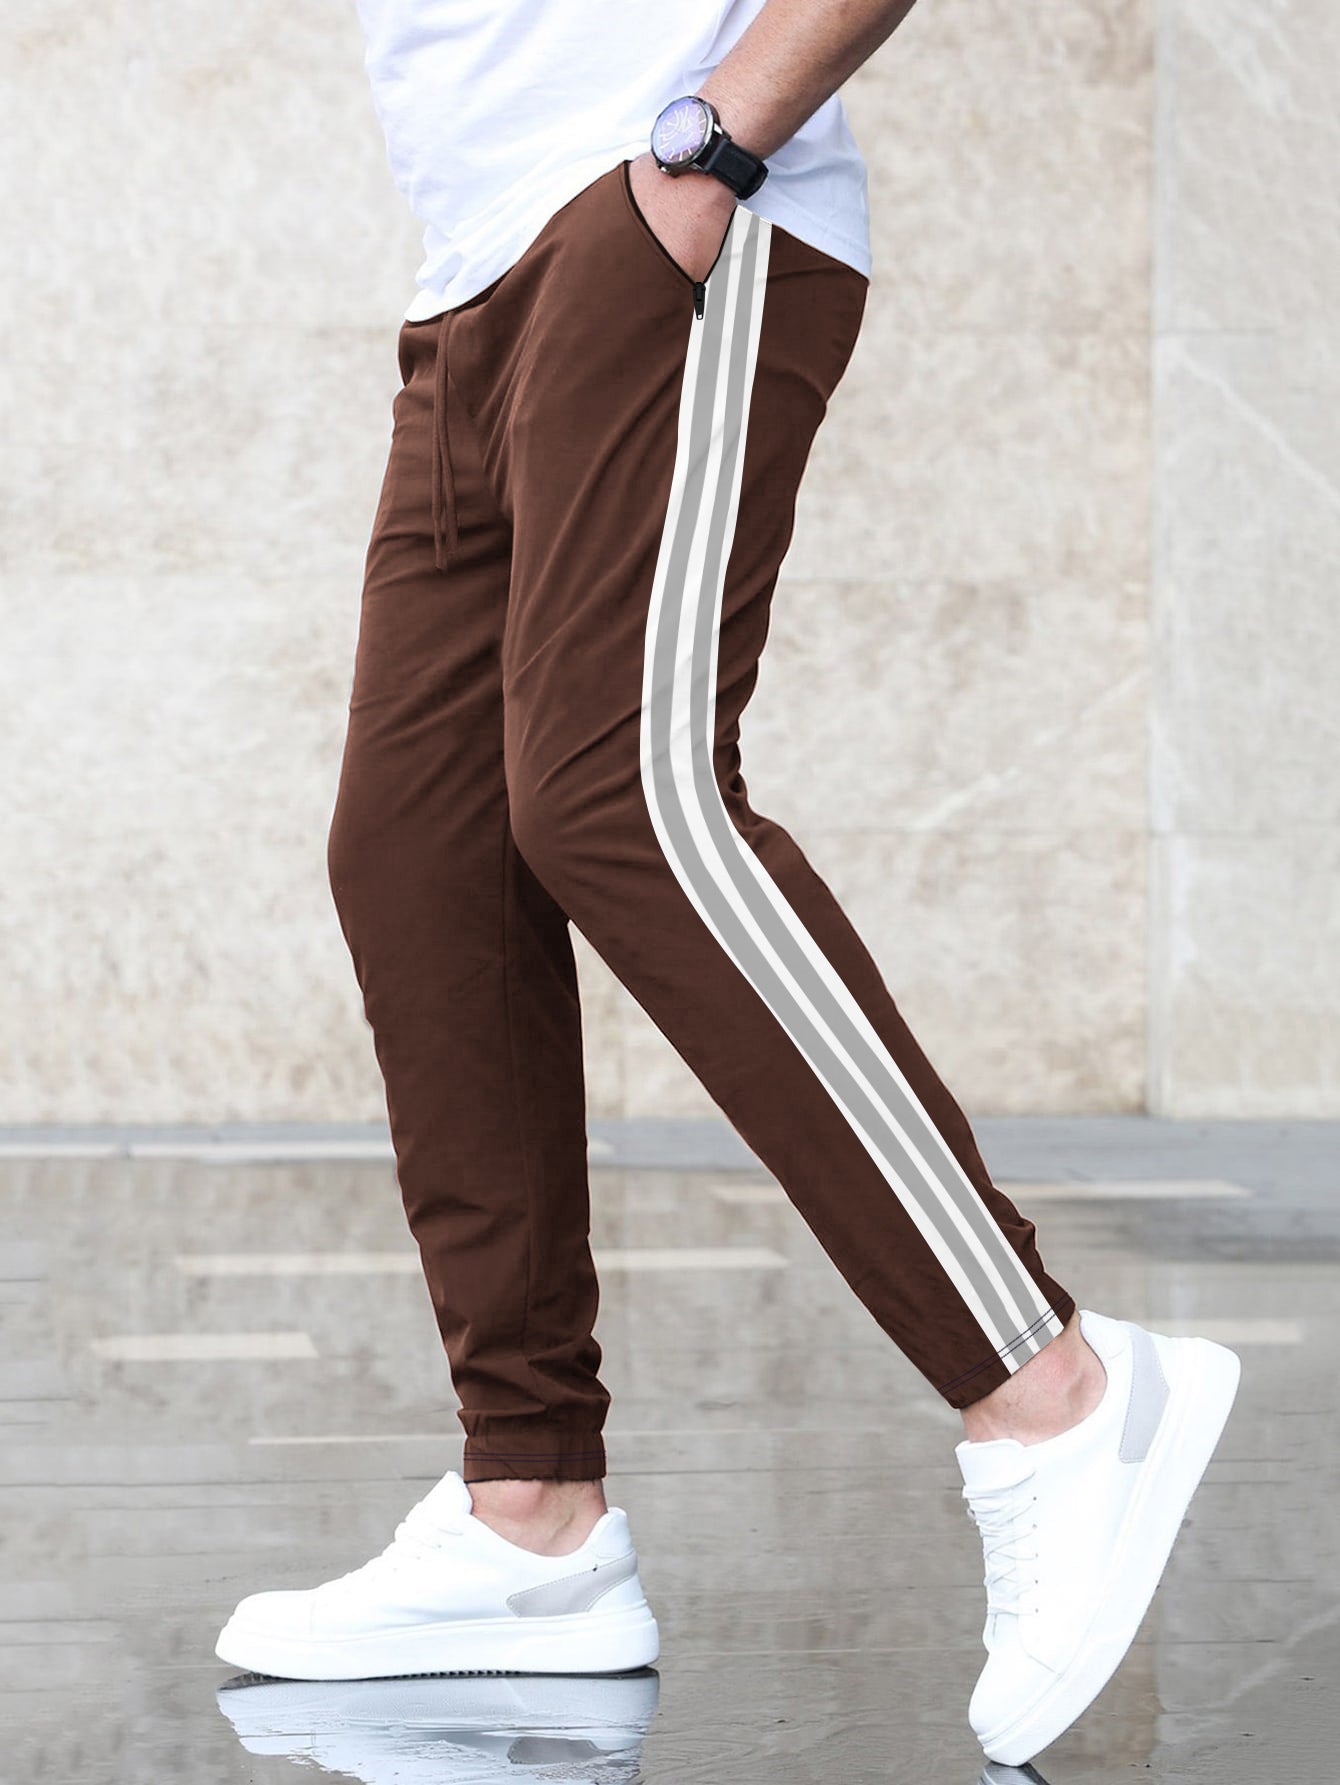 Louis Vicaci Summer Active Wear Trouser Pant For Men-Tobacco Brown with Stripe-BR648